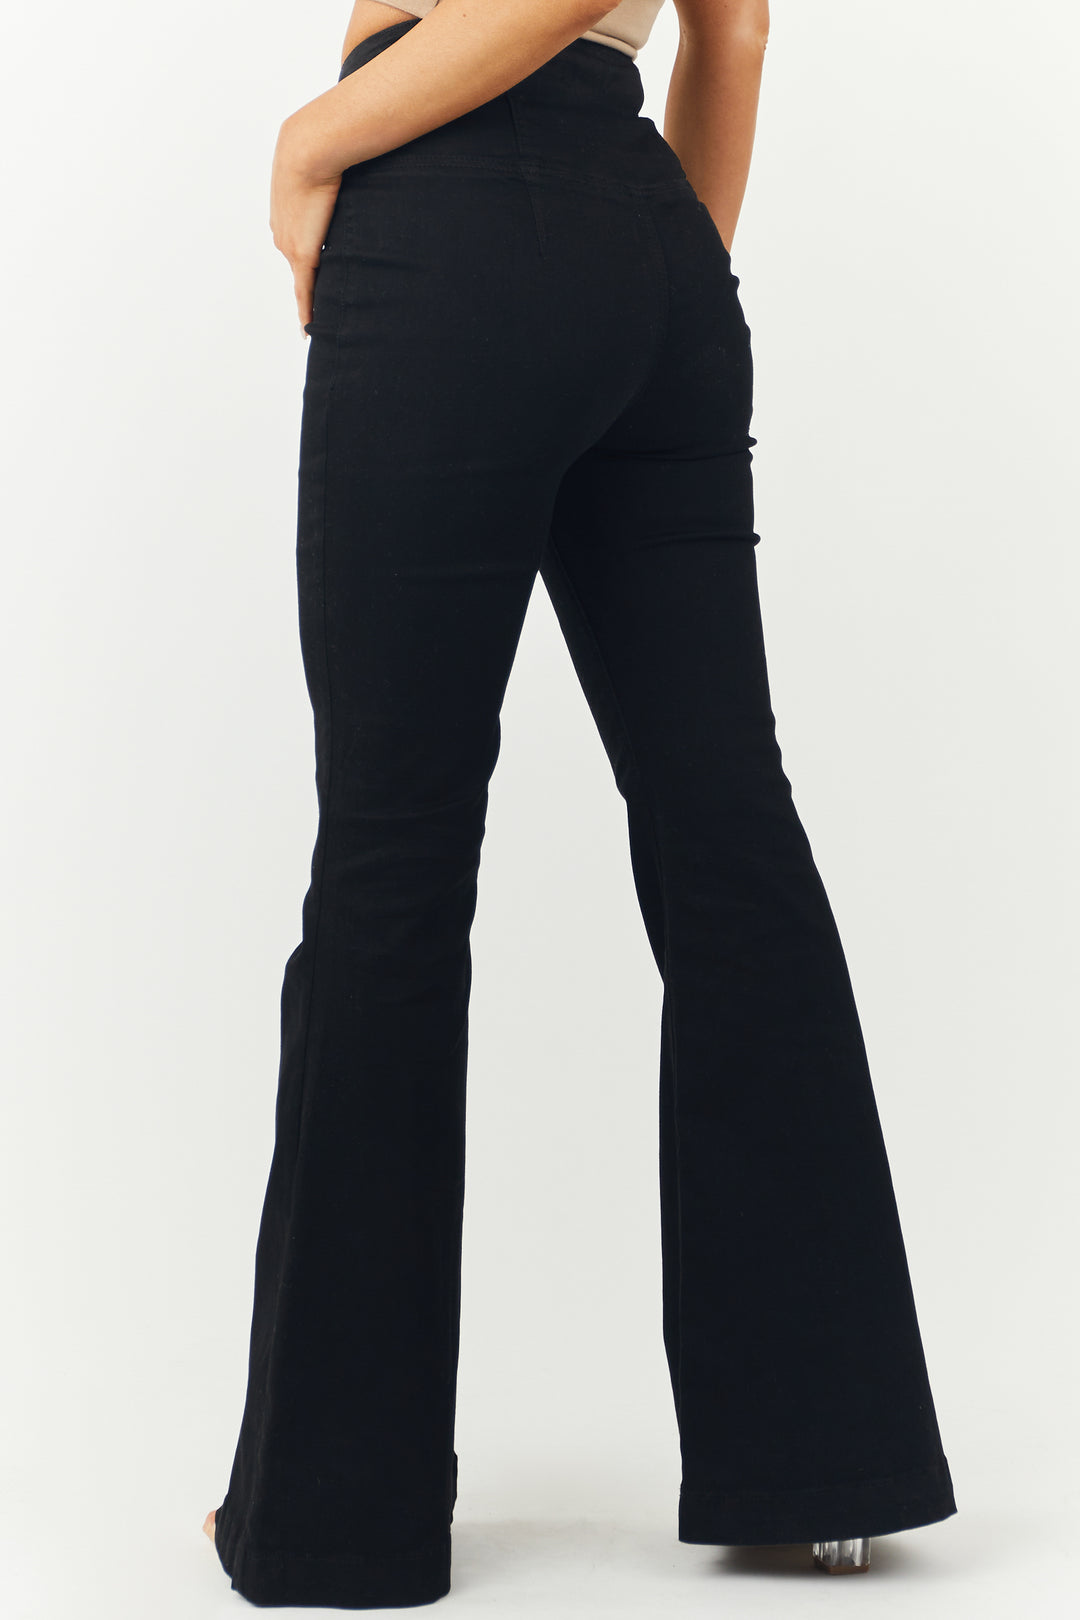 Vibrant Black High Rise Crossover Waist Flare Jeans & Lime Lush